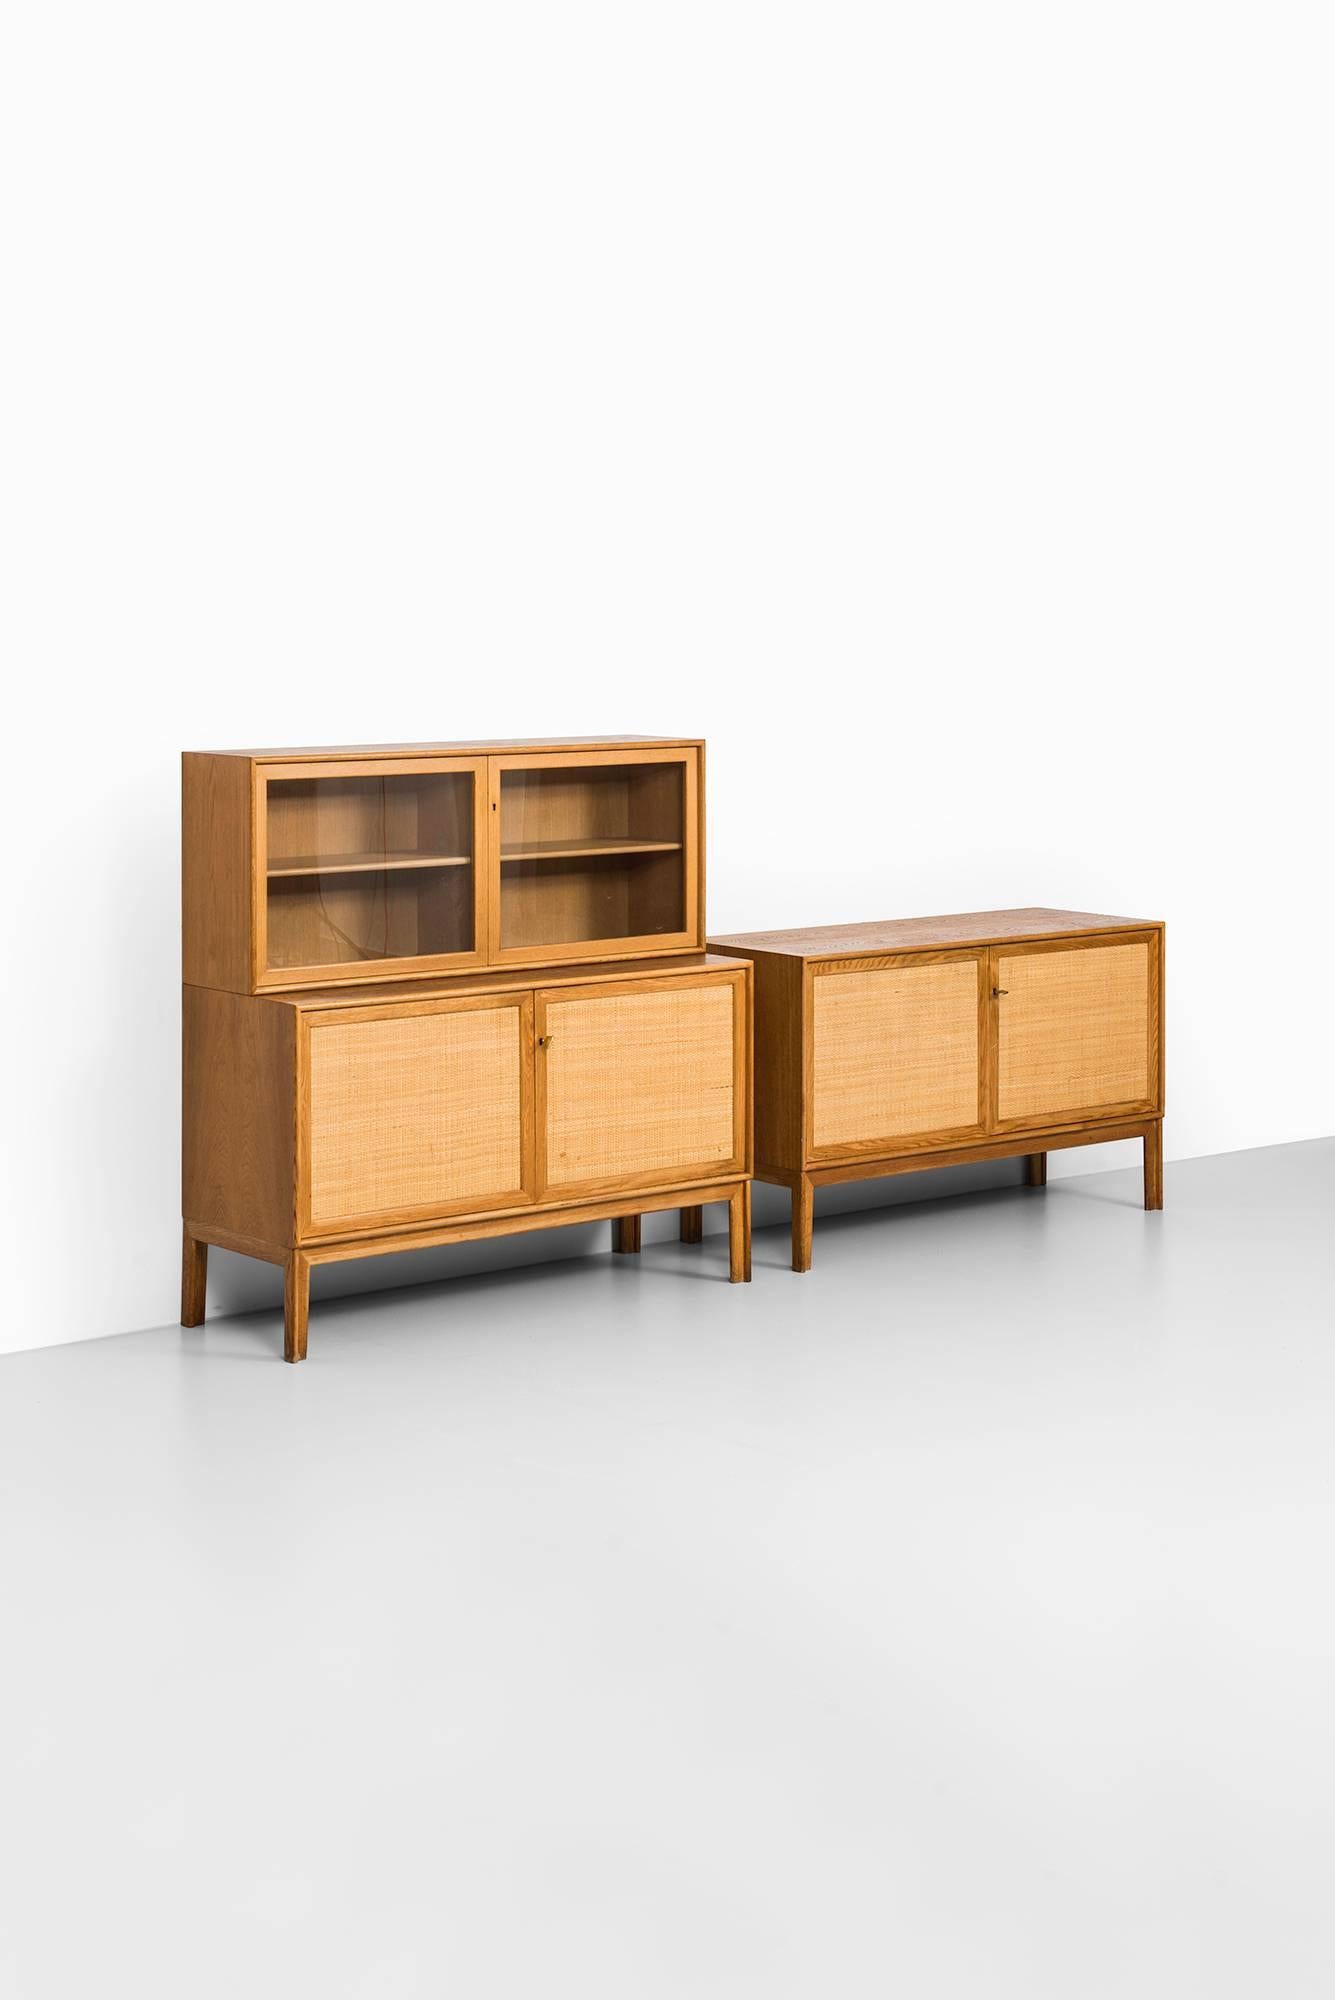 Alf Svensson Sideboards with Glass Cabinet by BjäSta in Sweden 2